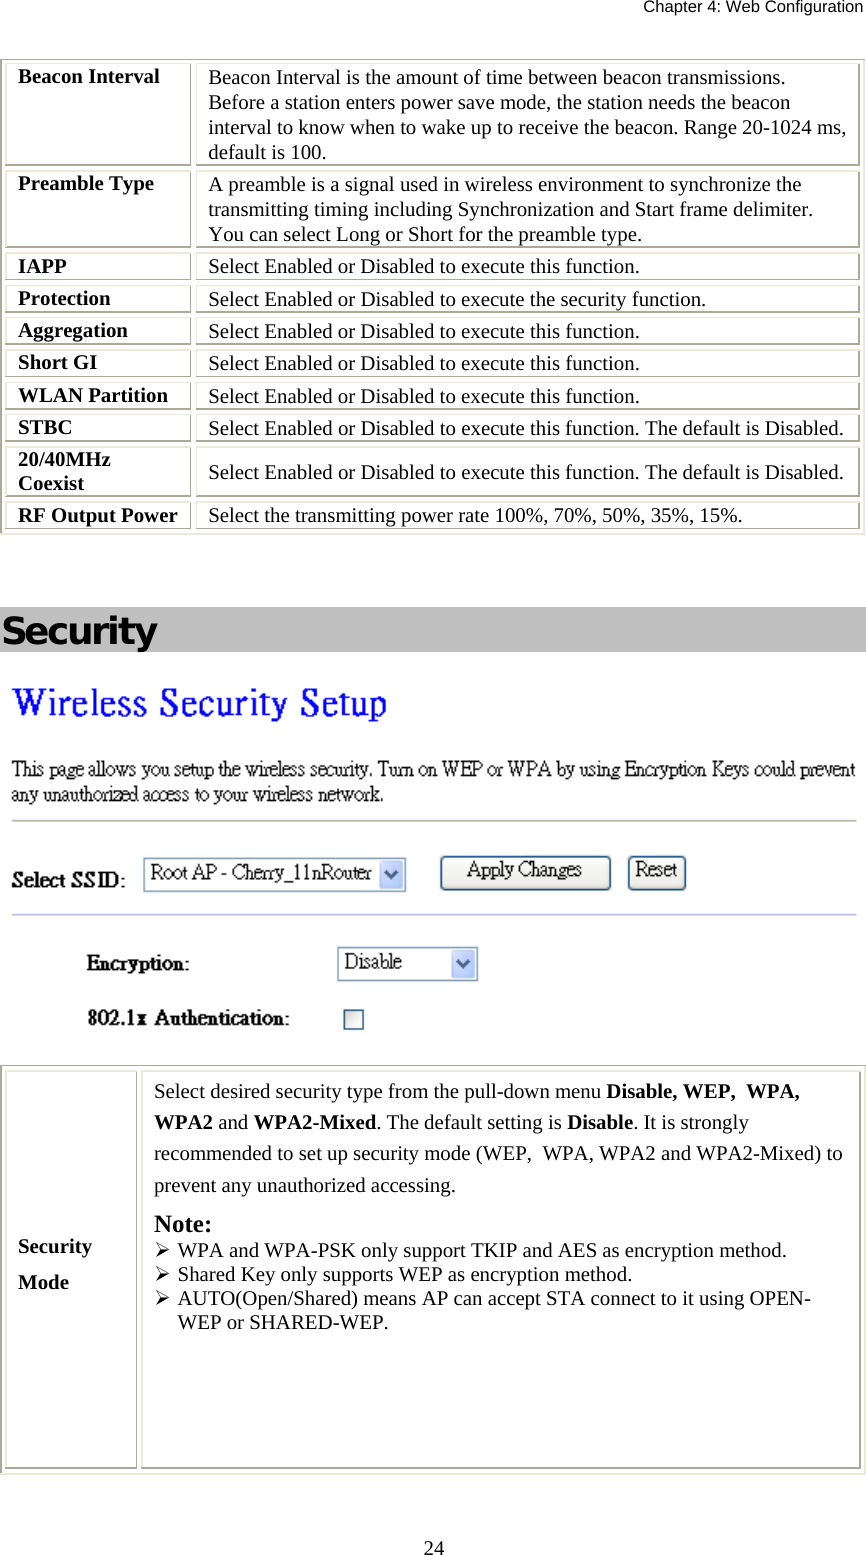   Chapter 4: Web Configuration  24Beacon Interval  Beacon Interval is the amount of time between beacon transmissions. Before a station enters power save mode, the station needs the beacon interval to know when to wake up to receive the beacon. Range 20-1024 ms, default is 100. Preamble Type  A preamble is a signal used in wireless environment to synchronize the transmitting timing including Synchronization and Start frame delimiter. You can select Long or Short for the preamble type. IAPP  Select Enabled or Disabled to execute this function. Protection  Select Enabled or Disabled to execute the security function. Aggregation  Select Enabled or Disabled to execute this function. Short GI  Select Enabled or Disabled to execute this function. WLAN Partition  Select Enabled or Disabled to execute this function. STBC  Select Enabled or Disabled to execute this function. The default is Disabled. 20/40MHz Coexist  Select Enabled or Disabled to execute this function. The default is Disabled. RF Output Power  Select the transmitting power rate 100%, 70%, 50%, 35%, 15%.    Security   Security Mode Select desired security type from the pull-down menu Disable, WEP,  WPA, WPA2 and WPA2-Mixed. The default setting is Disable. It is strongly recommended to set up security mode (WEP,  WPA, WPA2 and WPA2-Mixed) to prevent any unauthorized accessing. Note:   WPA and WPA-PSK only support TKIP and AES as encryption method.  Shared Key only supports WEP as encryption method.  AUTO(Open/Shared) means AP can accept STA connect to it using OPEN-WEP or SHARED-WEP.   